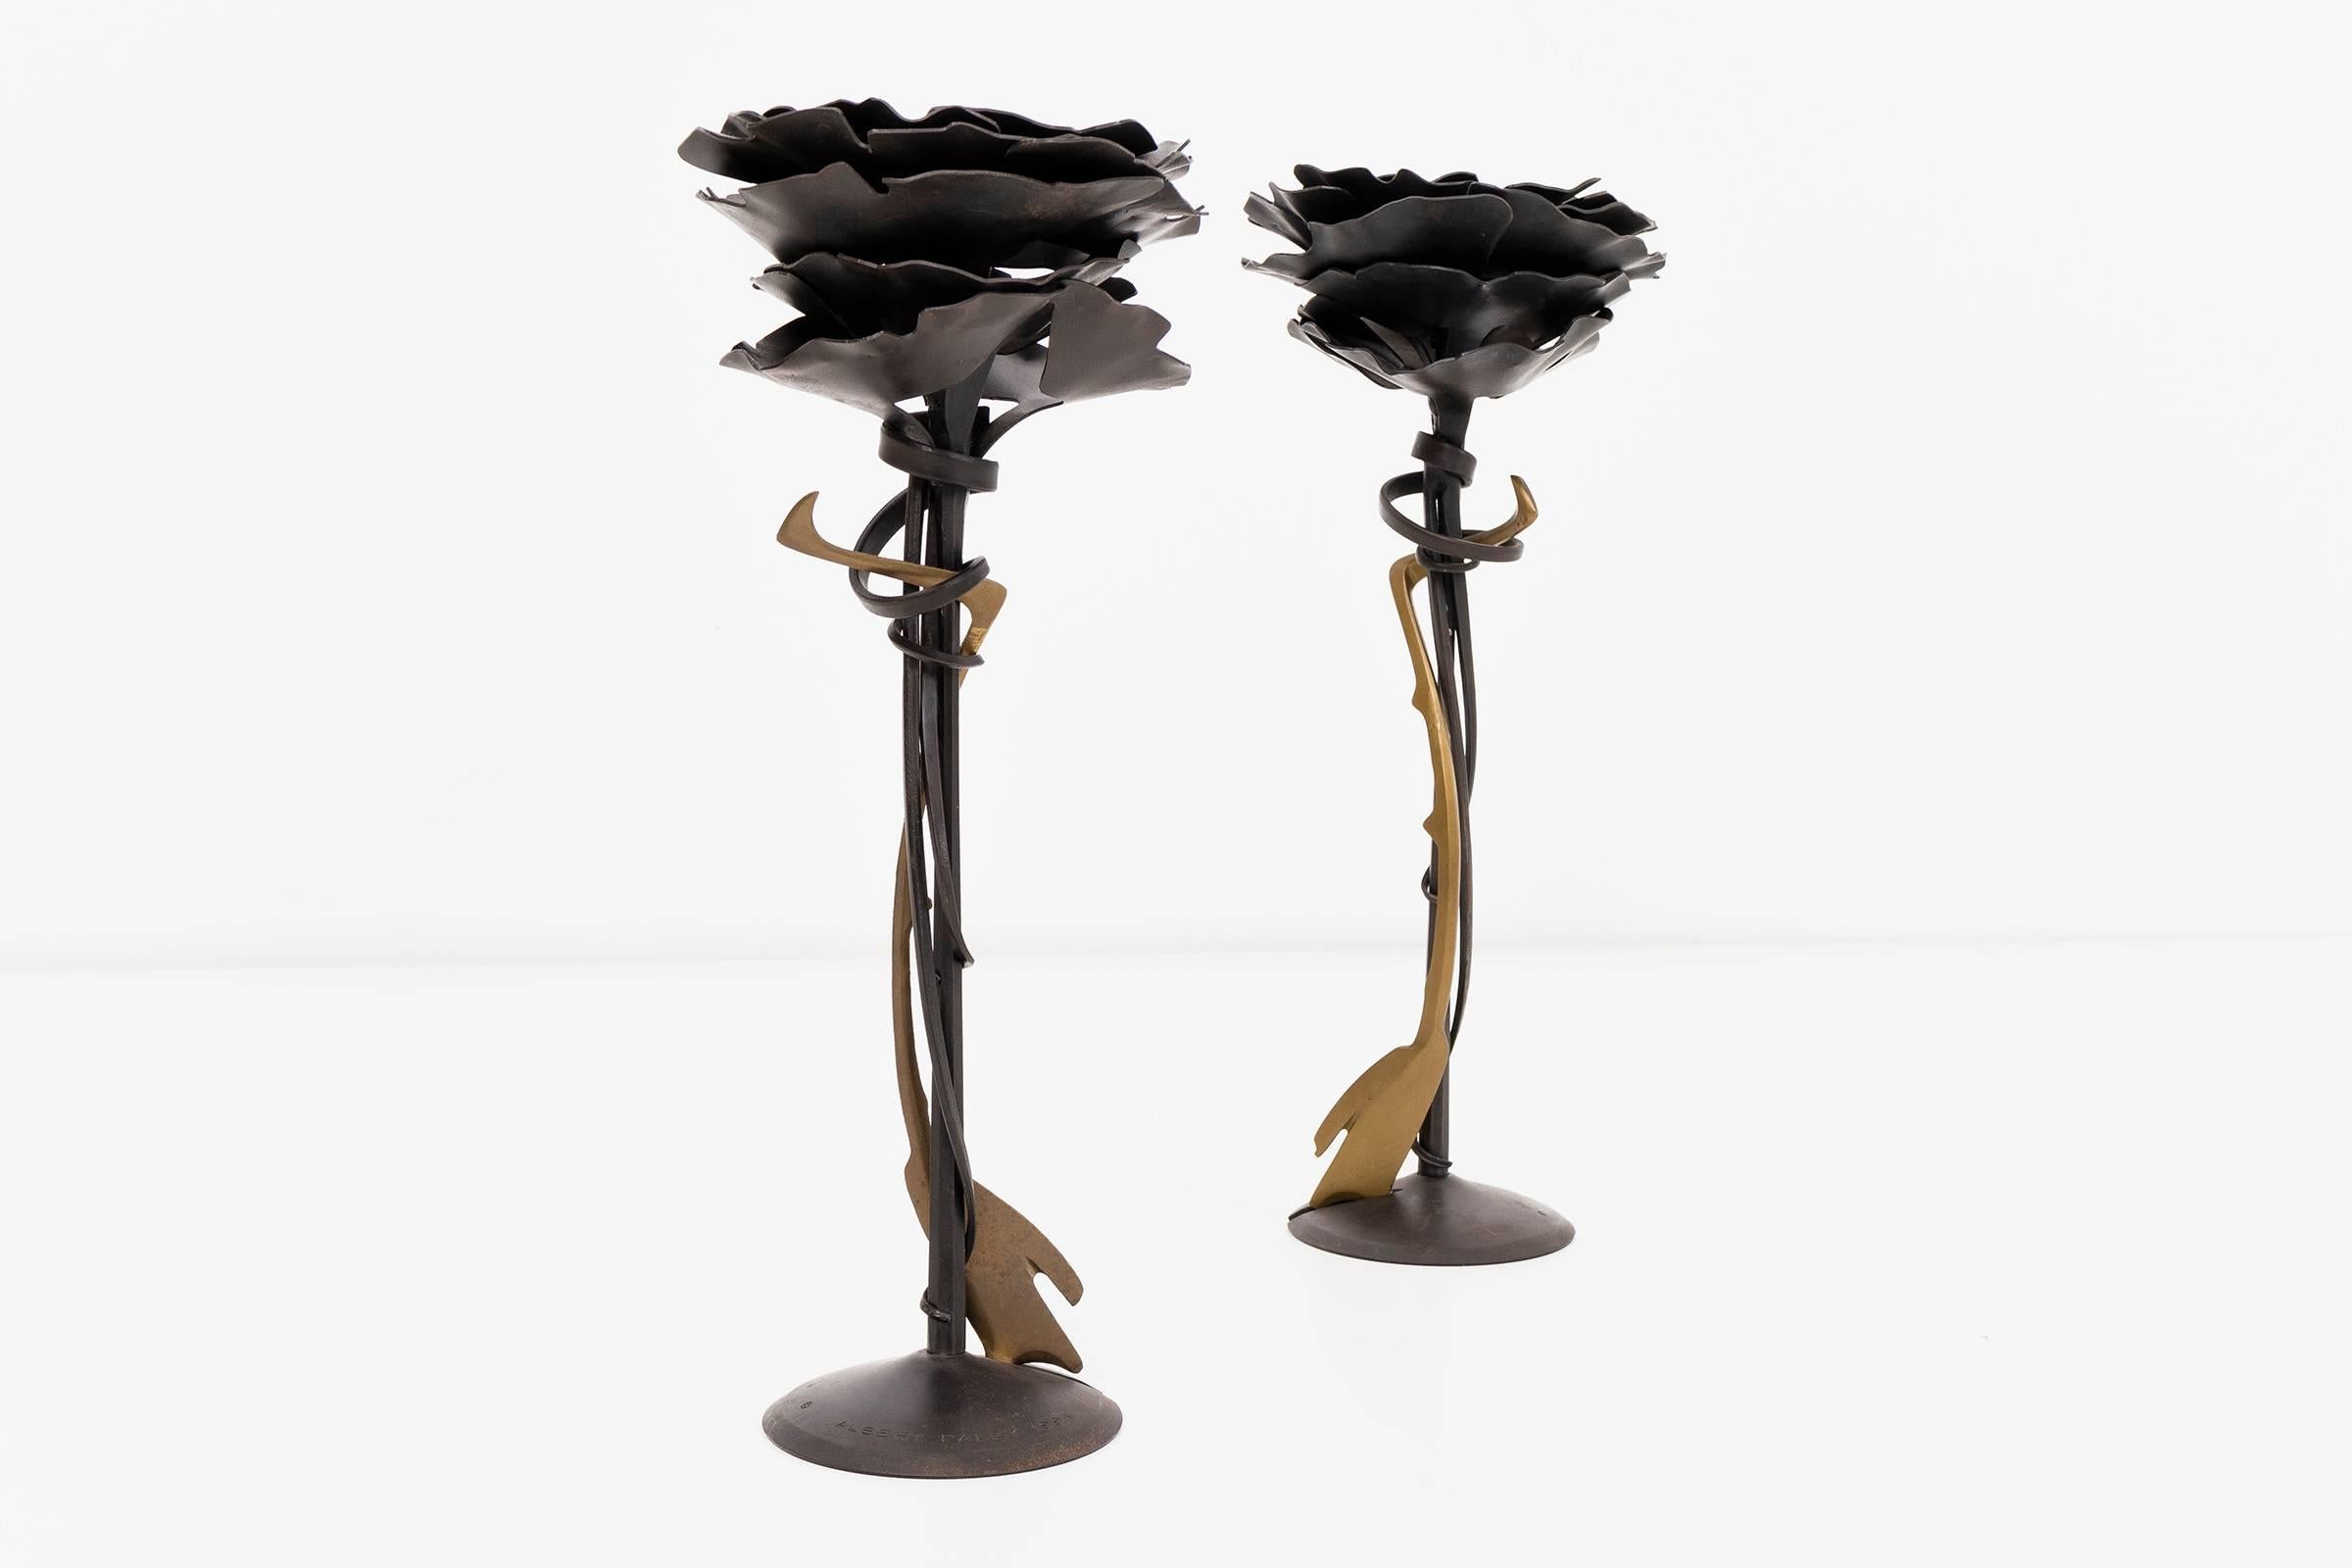 A pair of blossom candlesticks by Albert Paley Studio. Forged and blackened steel with brass accent. Signed and dated [Albert Paley 1994].

